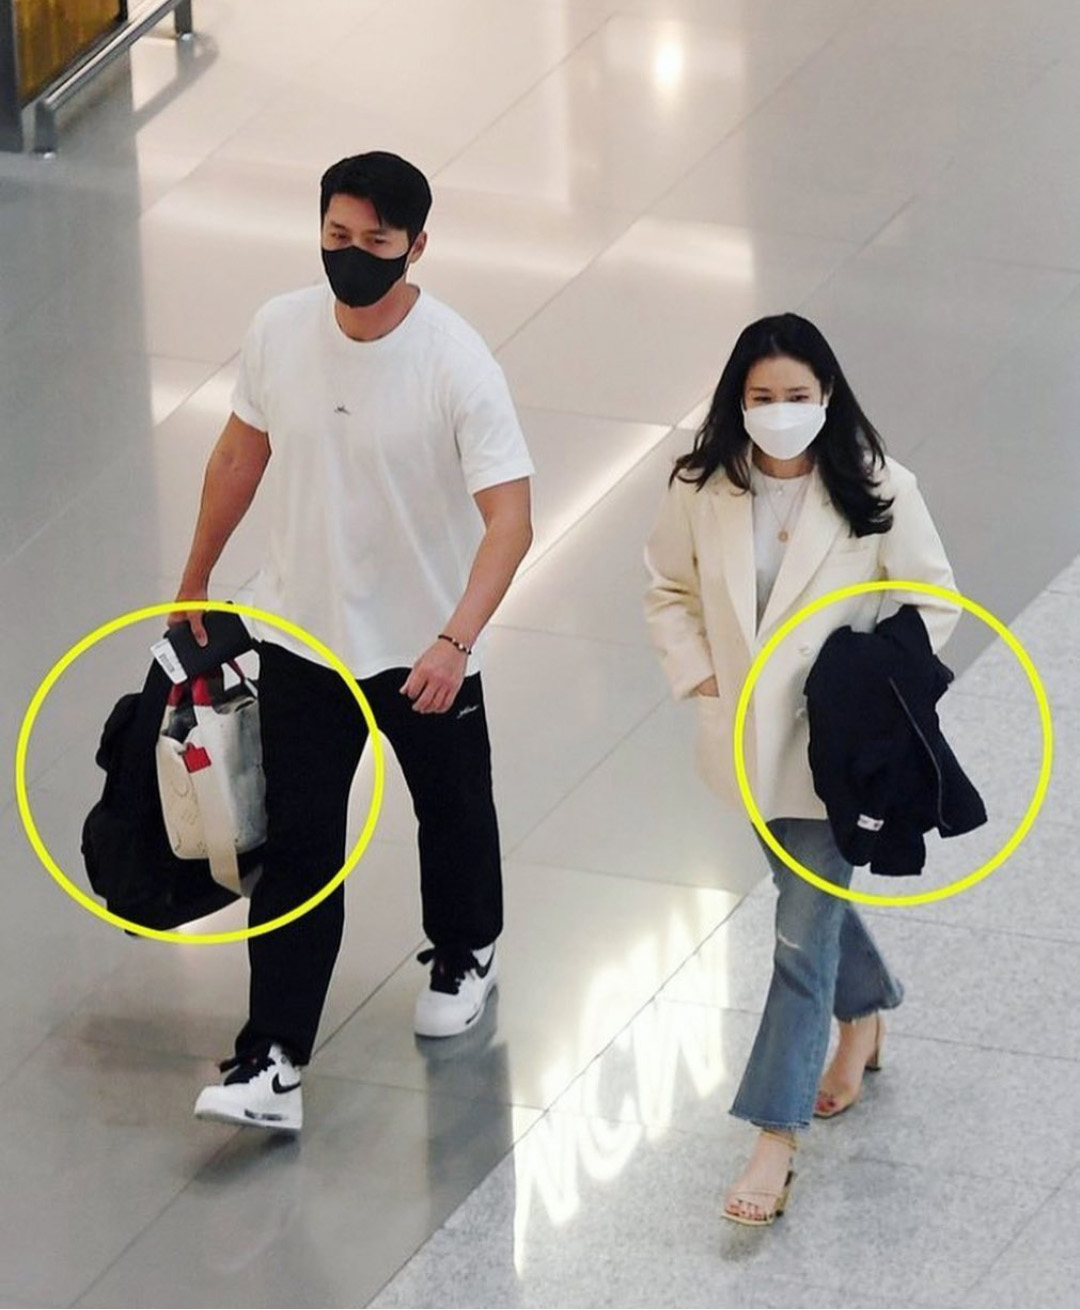 No need to go next to his wife Son Ye Jin, Hyun Bin also stormed the airport many times thanks to his 